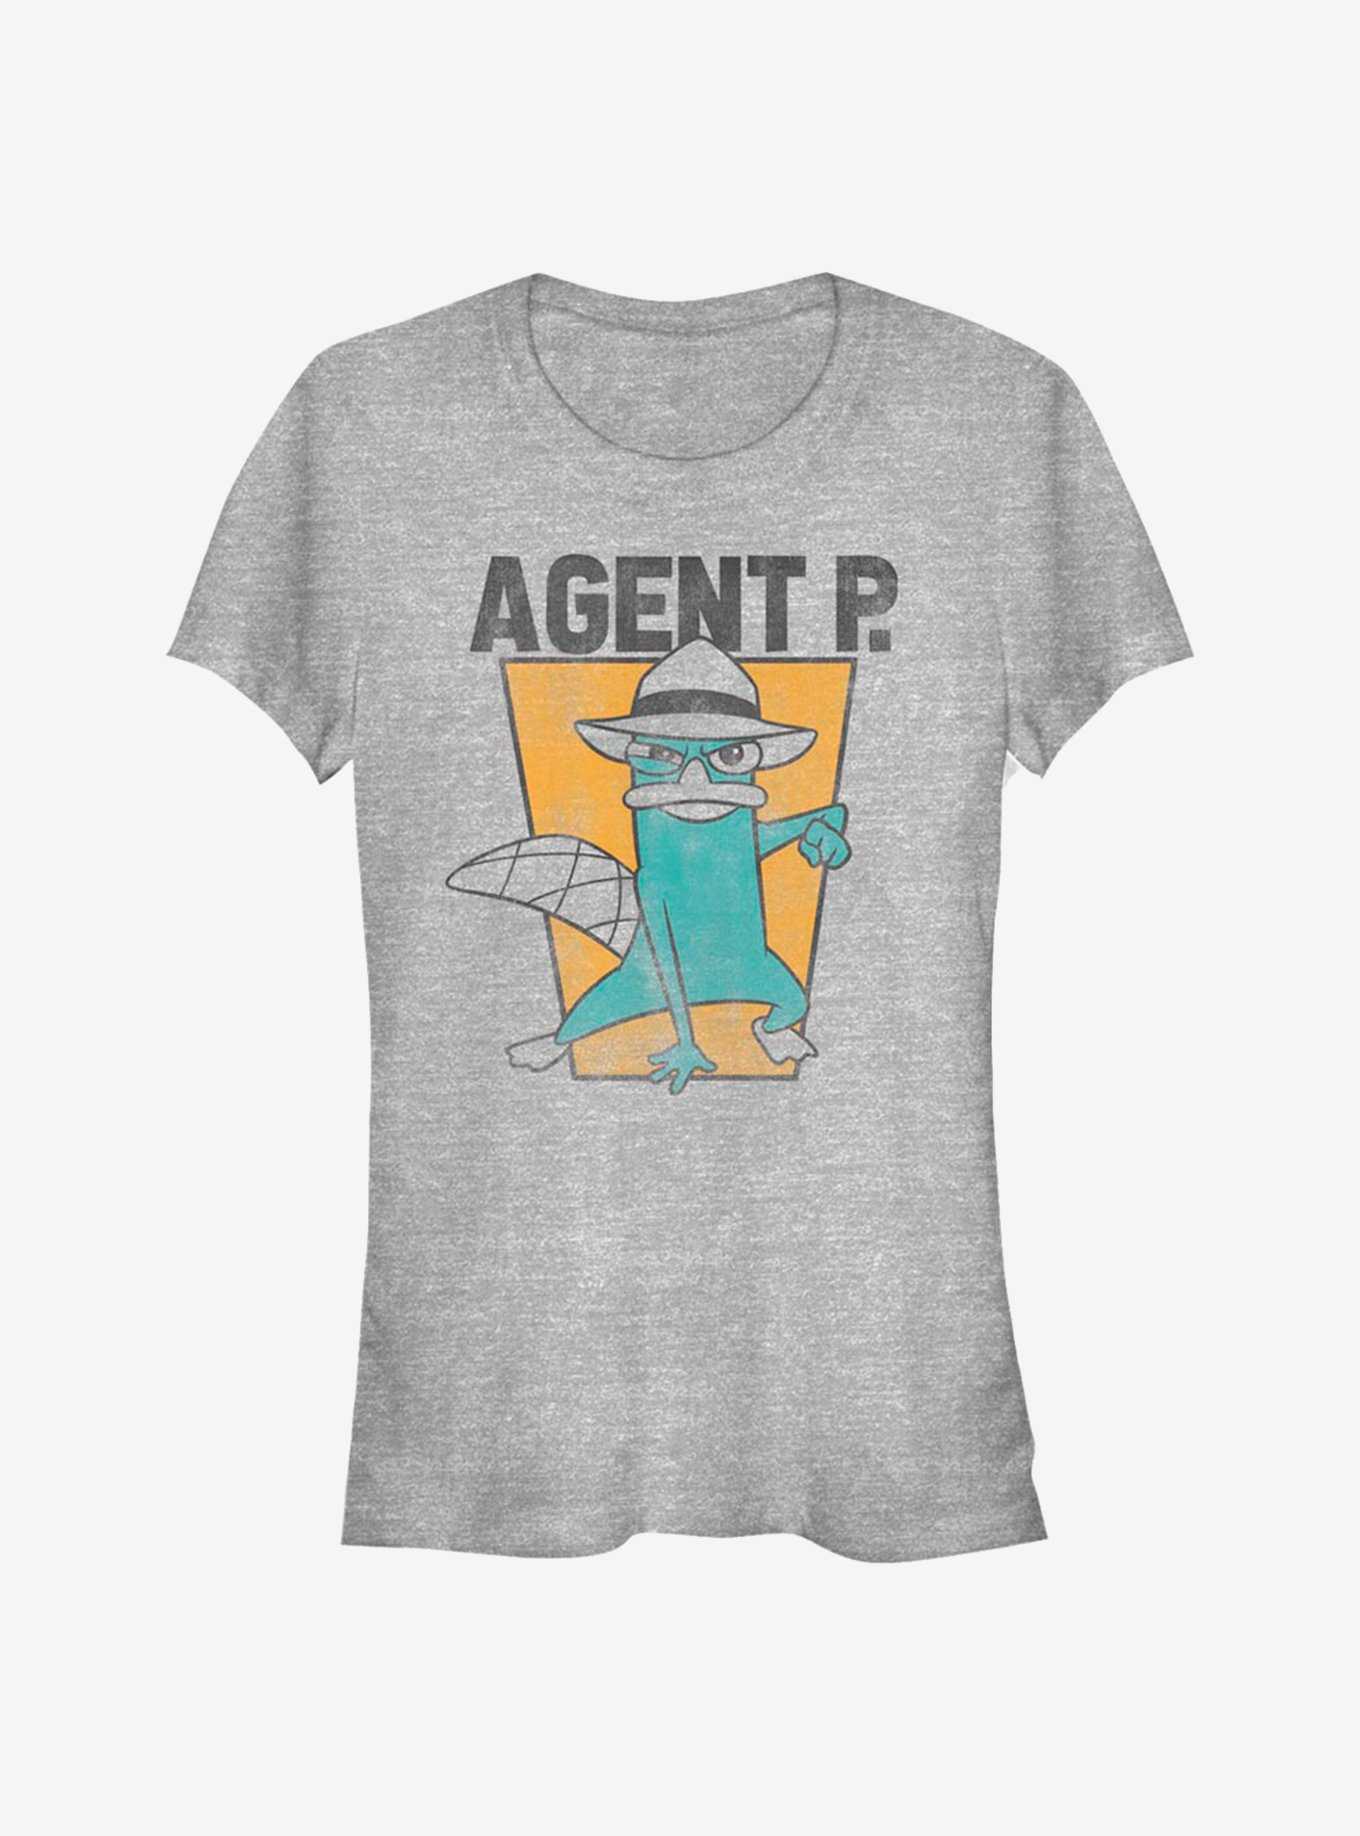 Disney Phineas And Ferb Agent P Girls T-Shirt, , hi-res